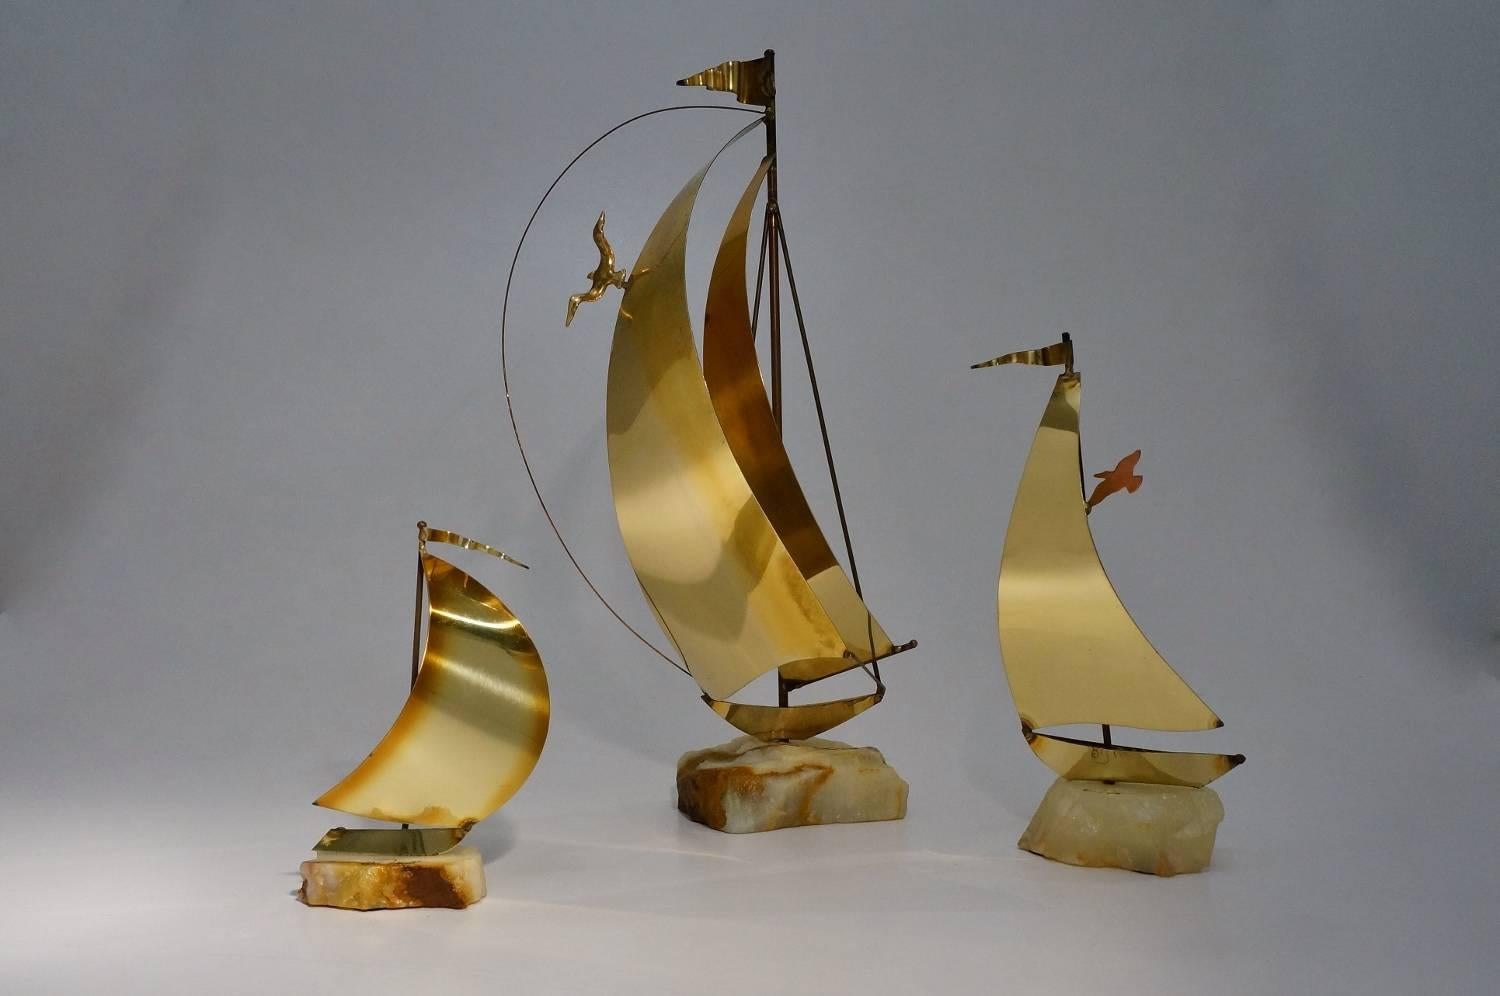 DeMott boat sculptures, set of four, brass on onyx or wood base, American, circa 1970s.

These four vintage sculptures have been gently cleaned while respecting the aged patina.

John and his brother Don DeMott were discovered by Macy’s